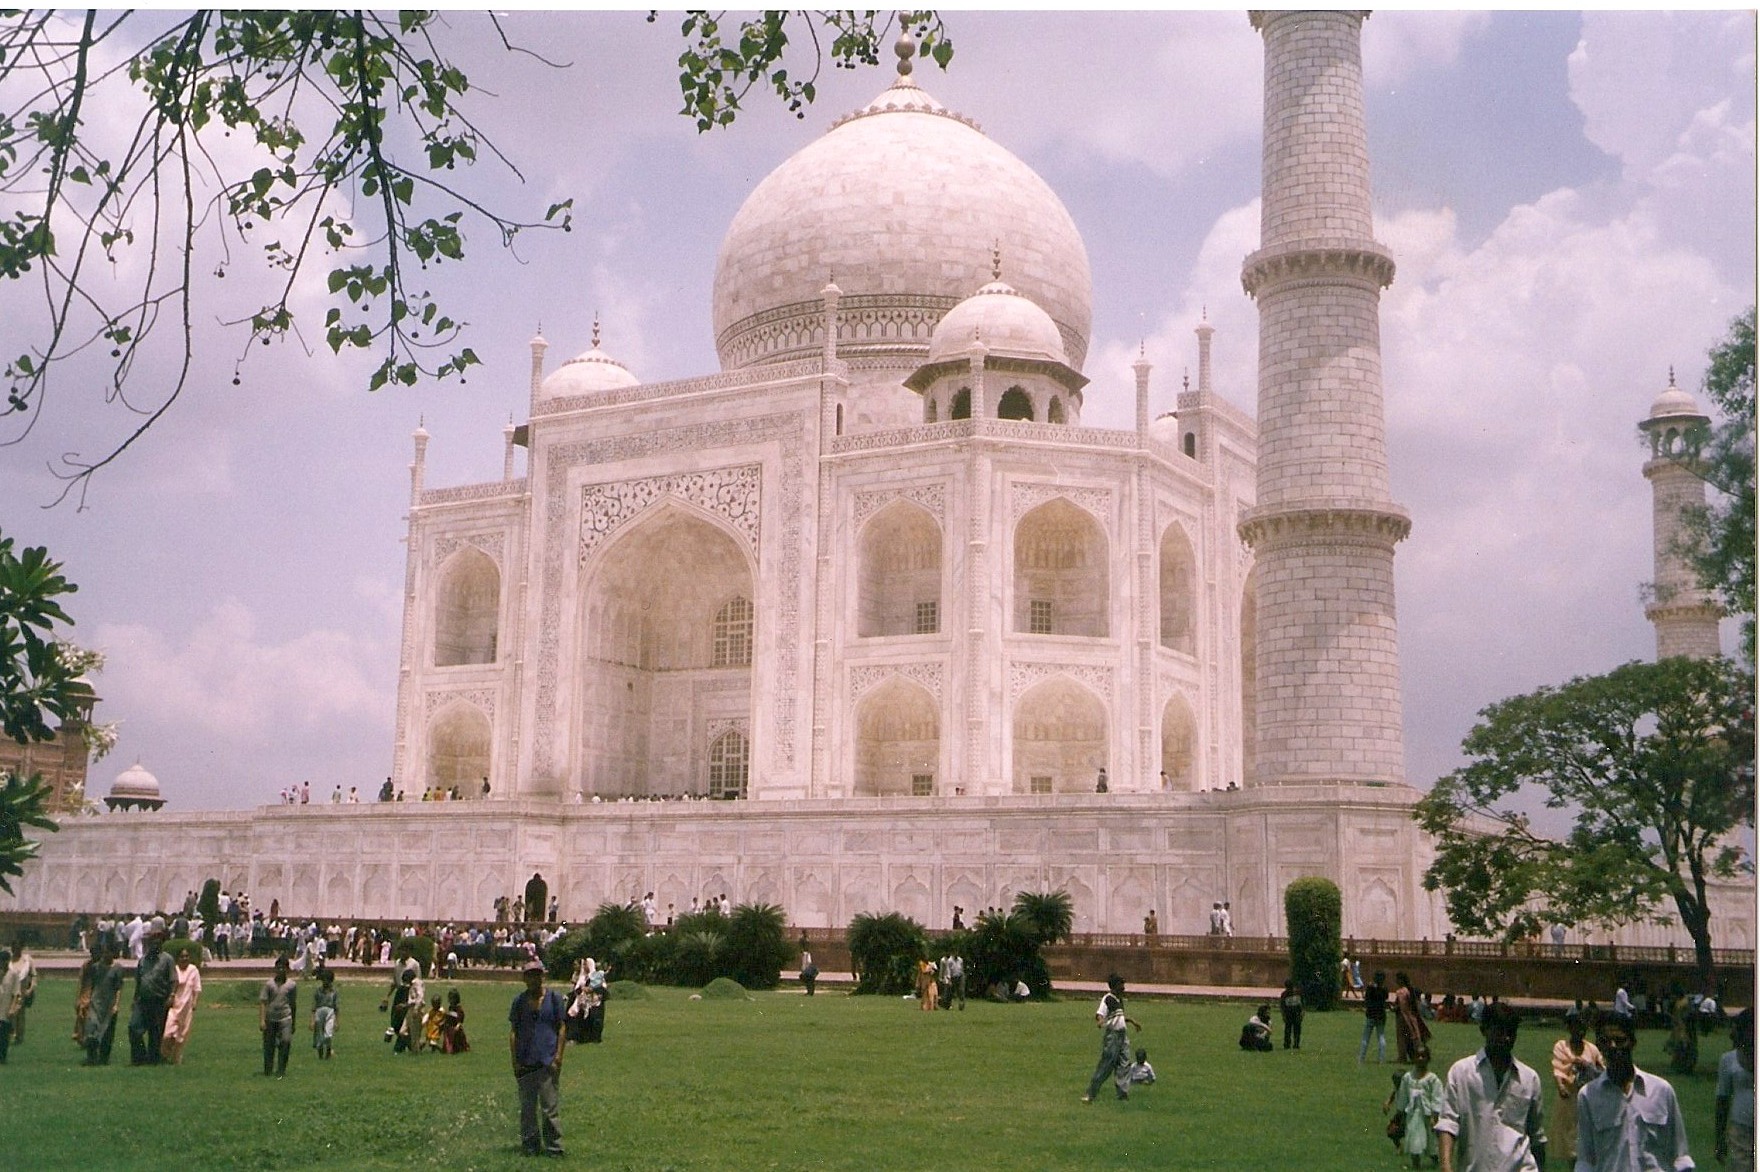 “Lotus Love” Chapter 15- Delhi & Agra: The End of the Paper Trail, Homage to Gandhi-Ji and Honeymoon at The Taj Mahal